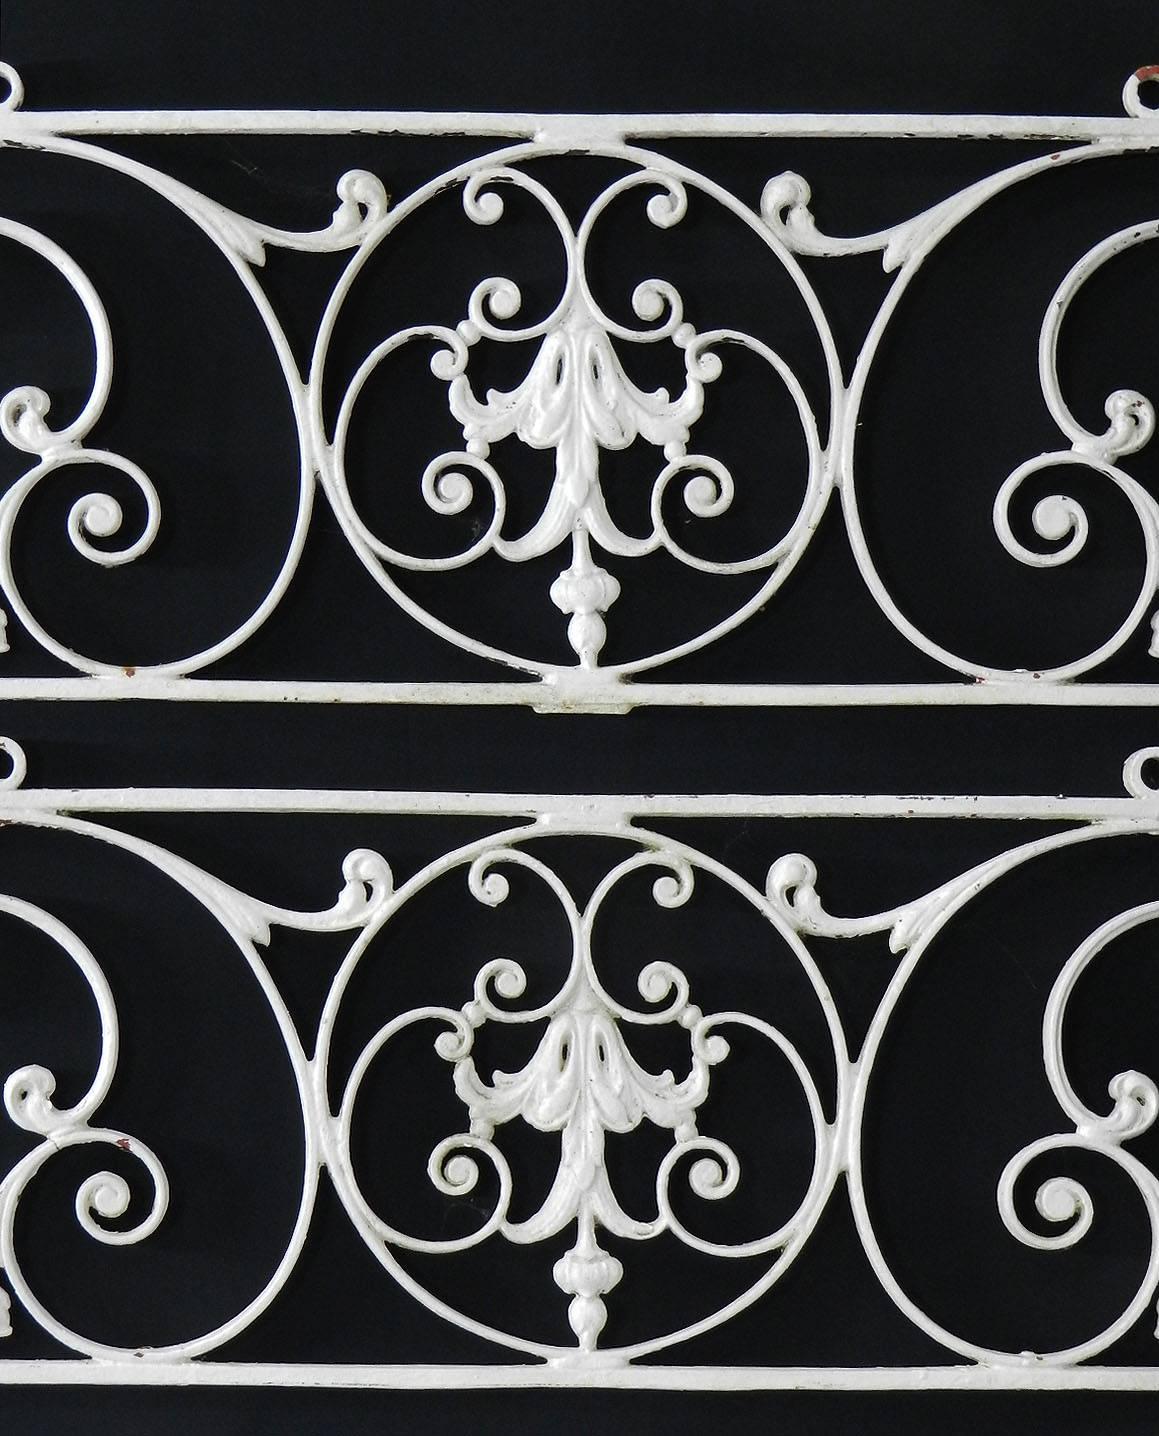 Two French wrought iron panels decorative wall hangings antique grills
heavy handcrafted antique panels
Architectural
Later painted white, easily changed to suit your interior
Good condition sound and solid with signs od age and